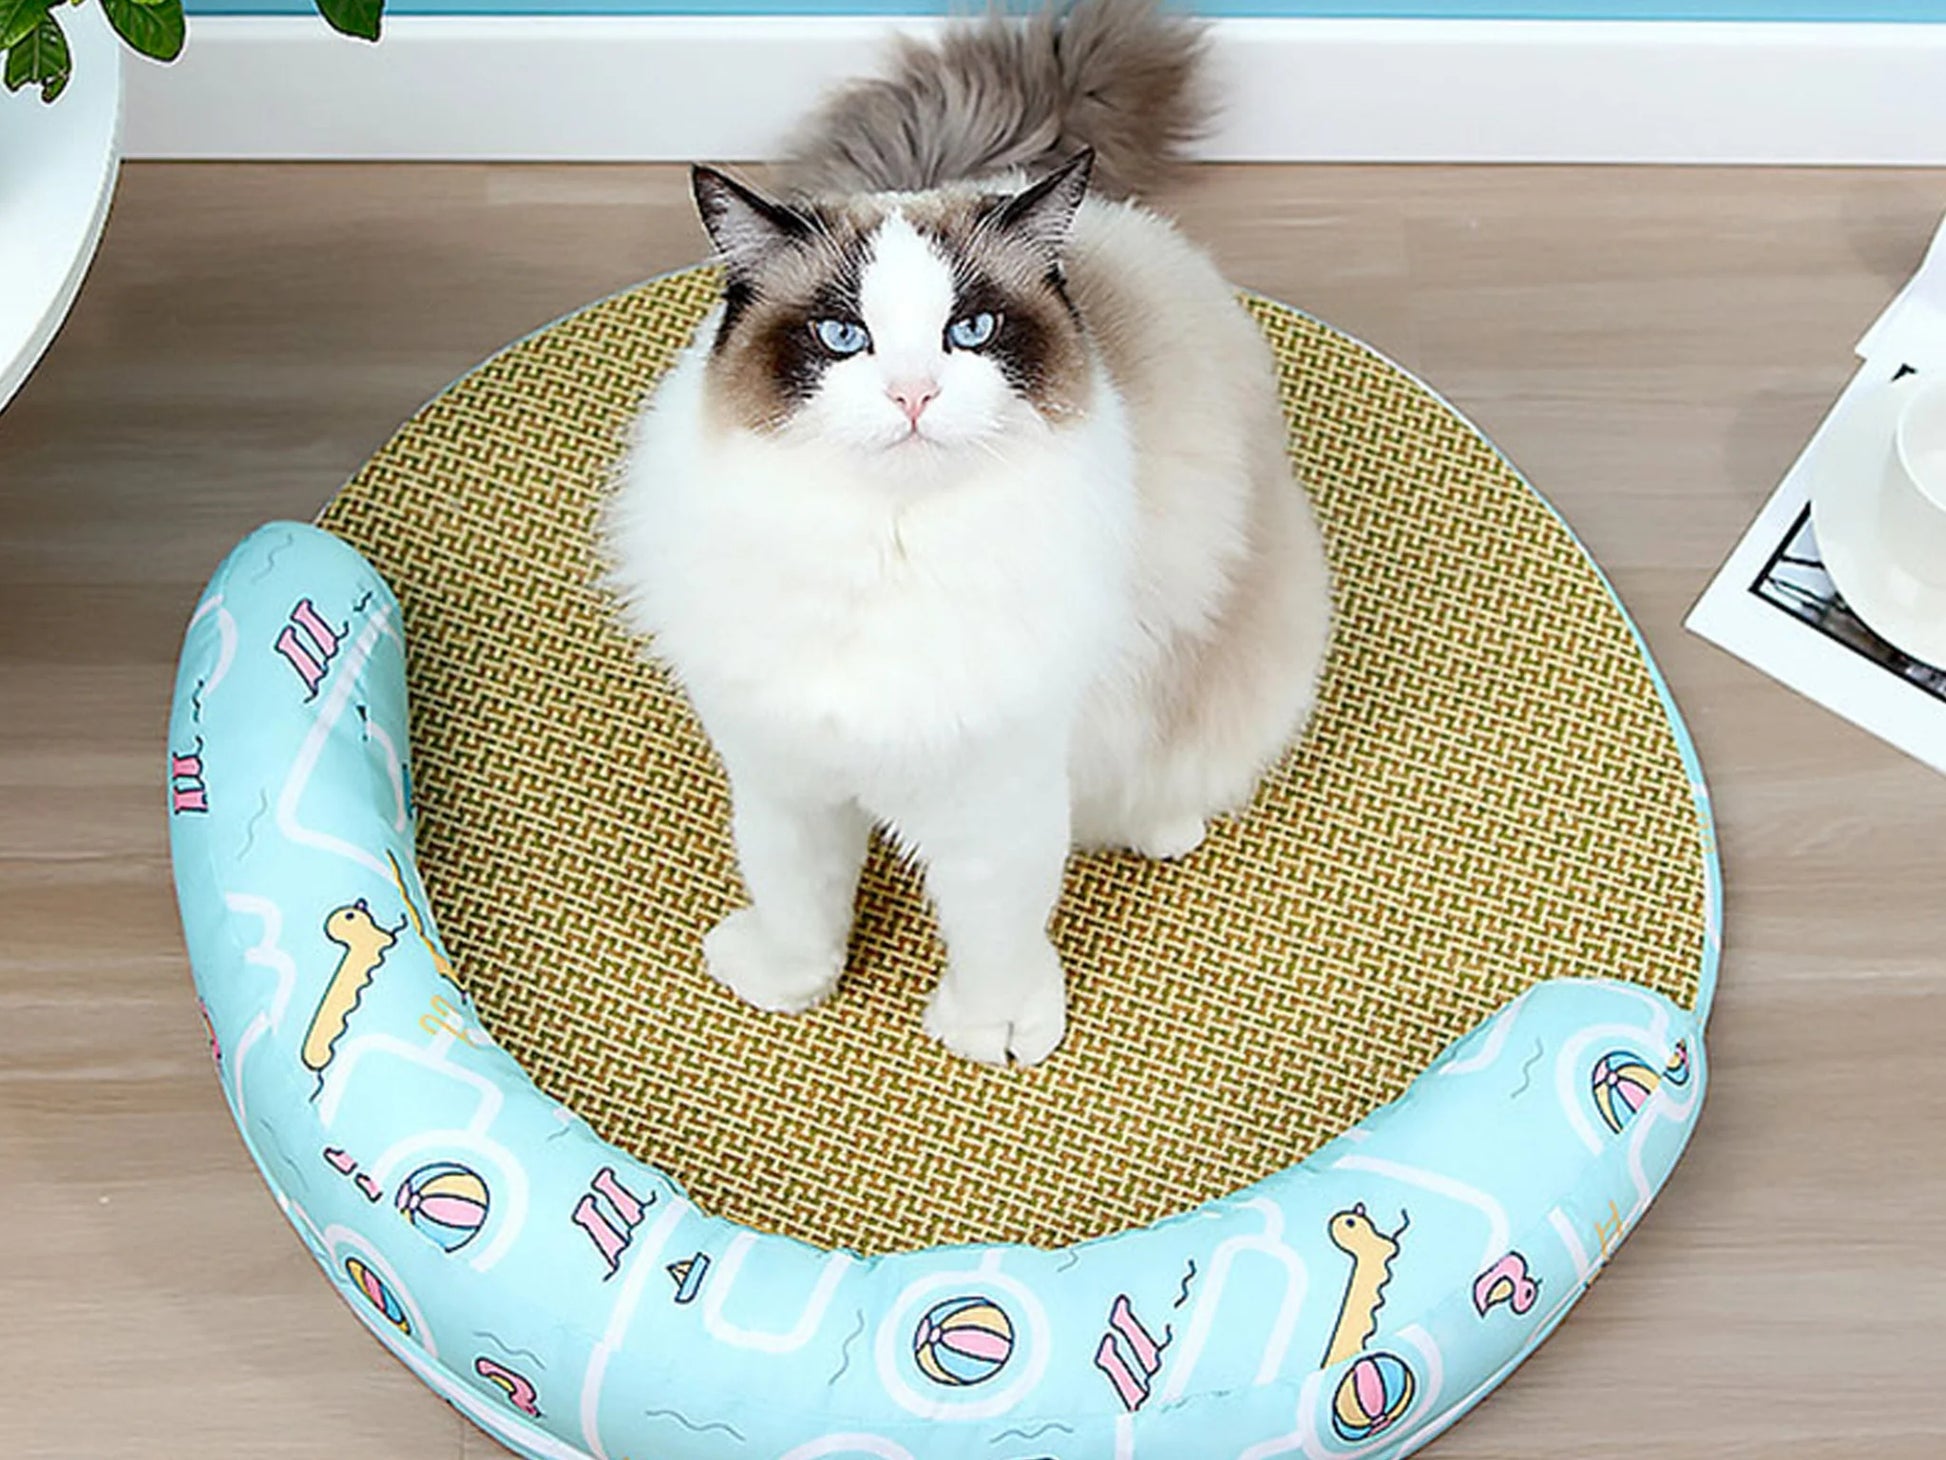 Summer Cooling Pet Bed with Ice Mat, Odor-Resistant Fabric, Cartoon Print - Ideal for Small to Medium Pets, Lightweight & Portable